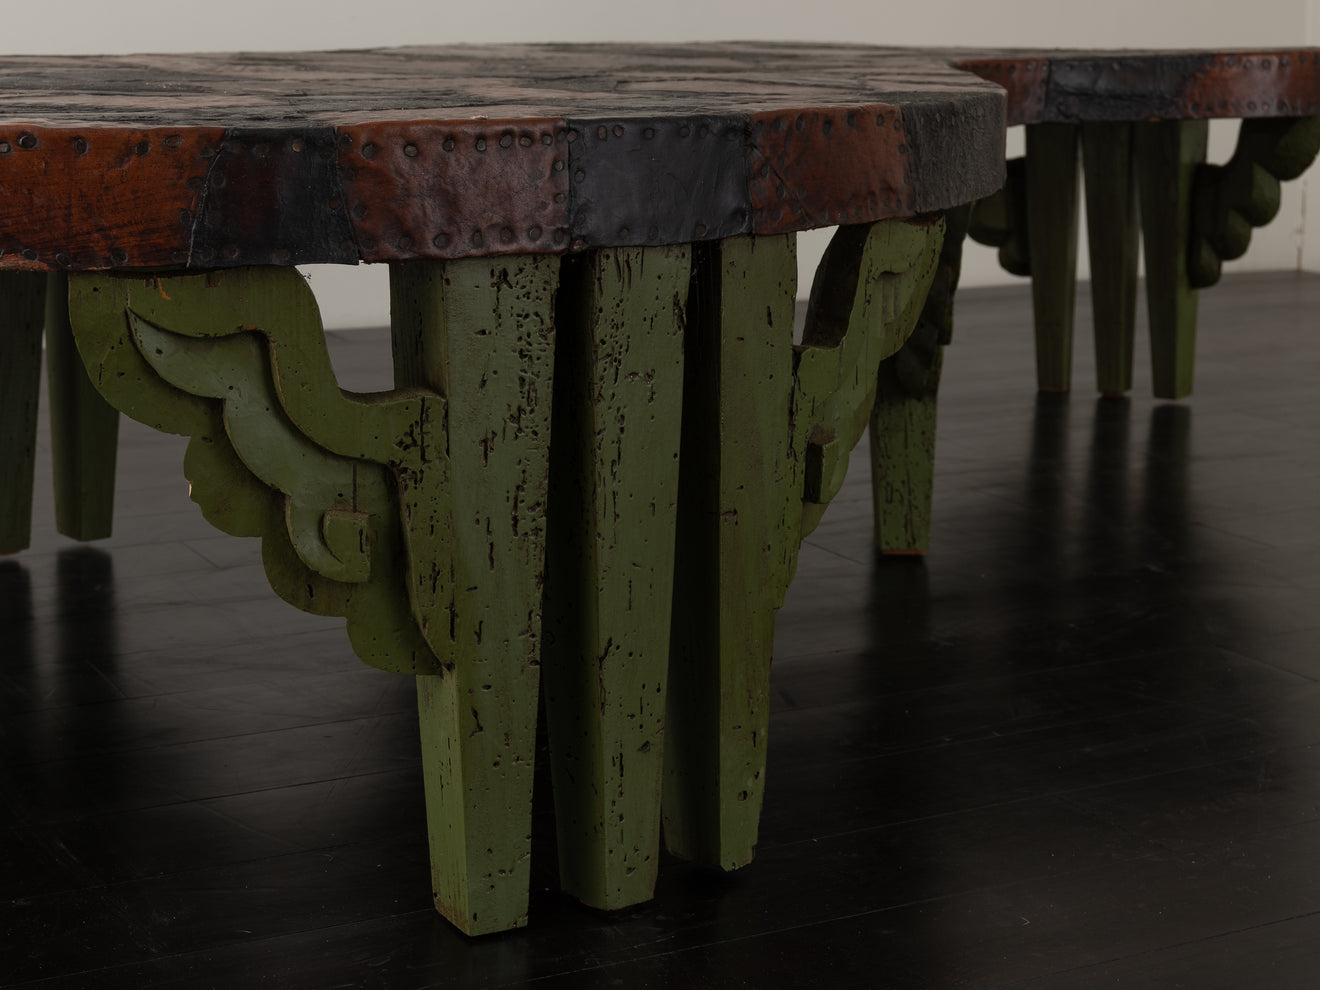 LARGE MONTEVIDEO COFFEE TABLE BY MIKE DIAZ